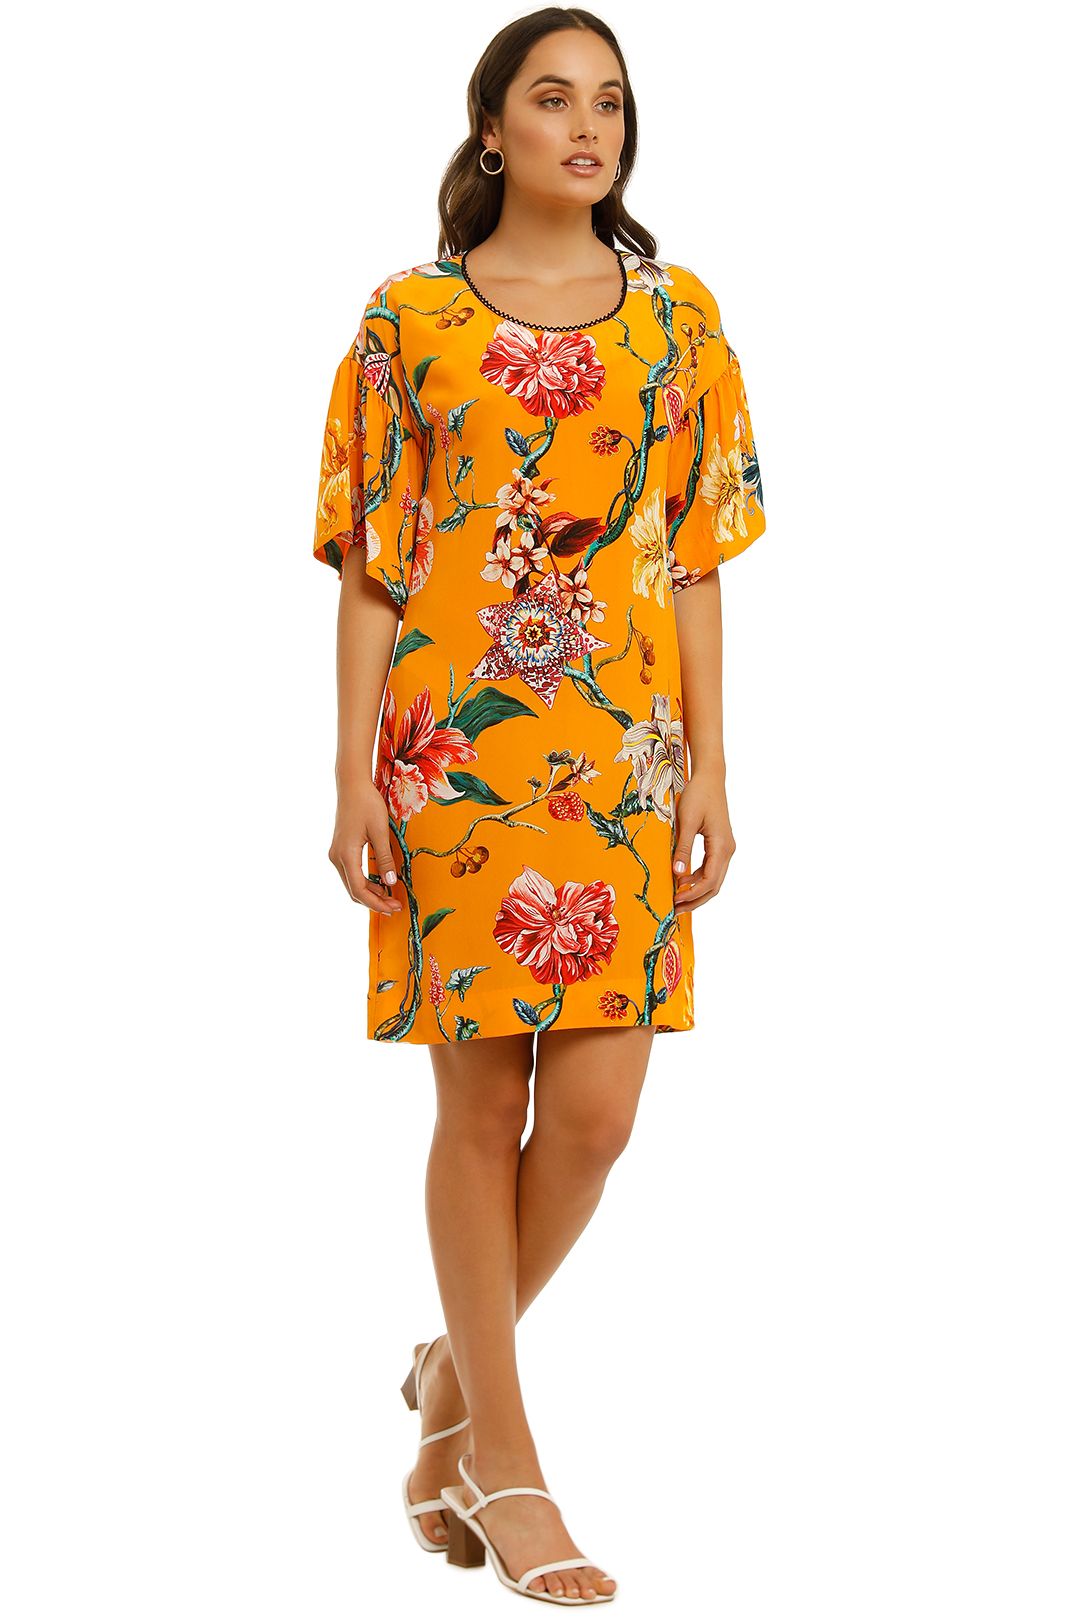 Trelise-Cooper-Nice-To-Sweet-You Tunic-Mango-Floral-Side